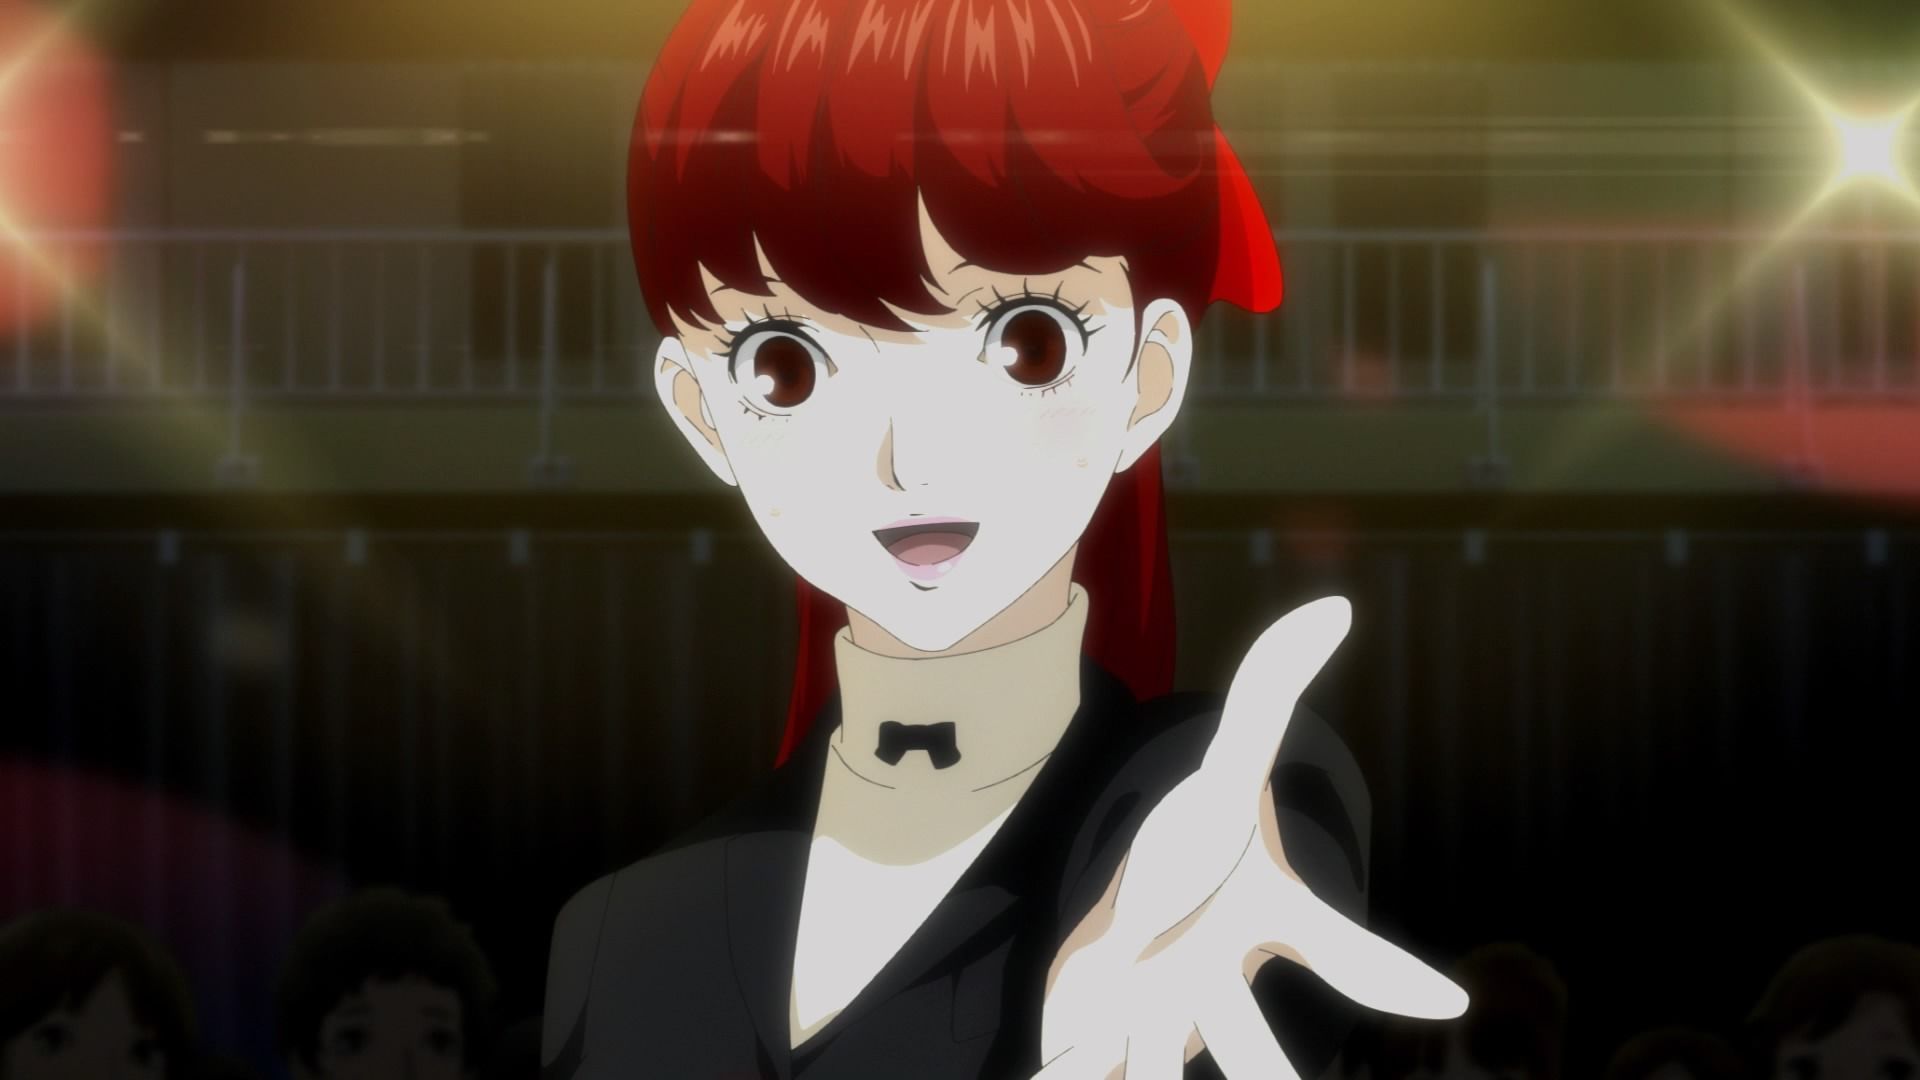 Persona 5 Royal - Kasumi holding out her hand